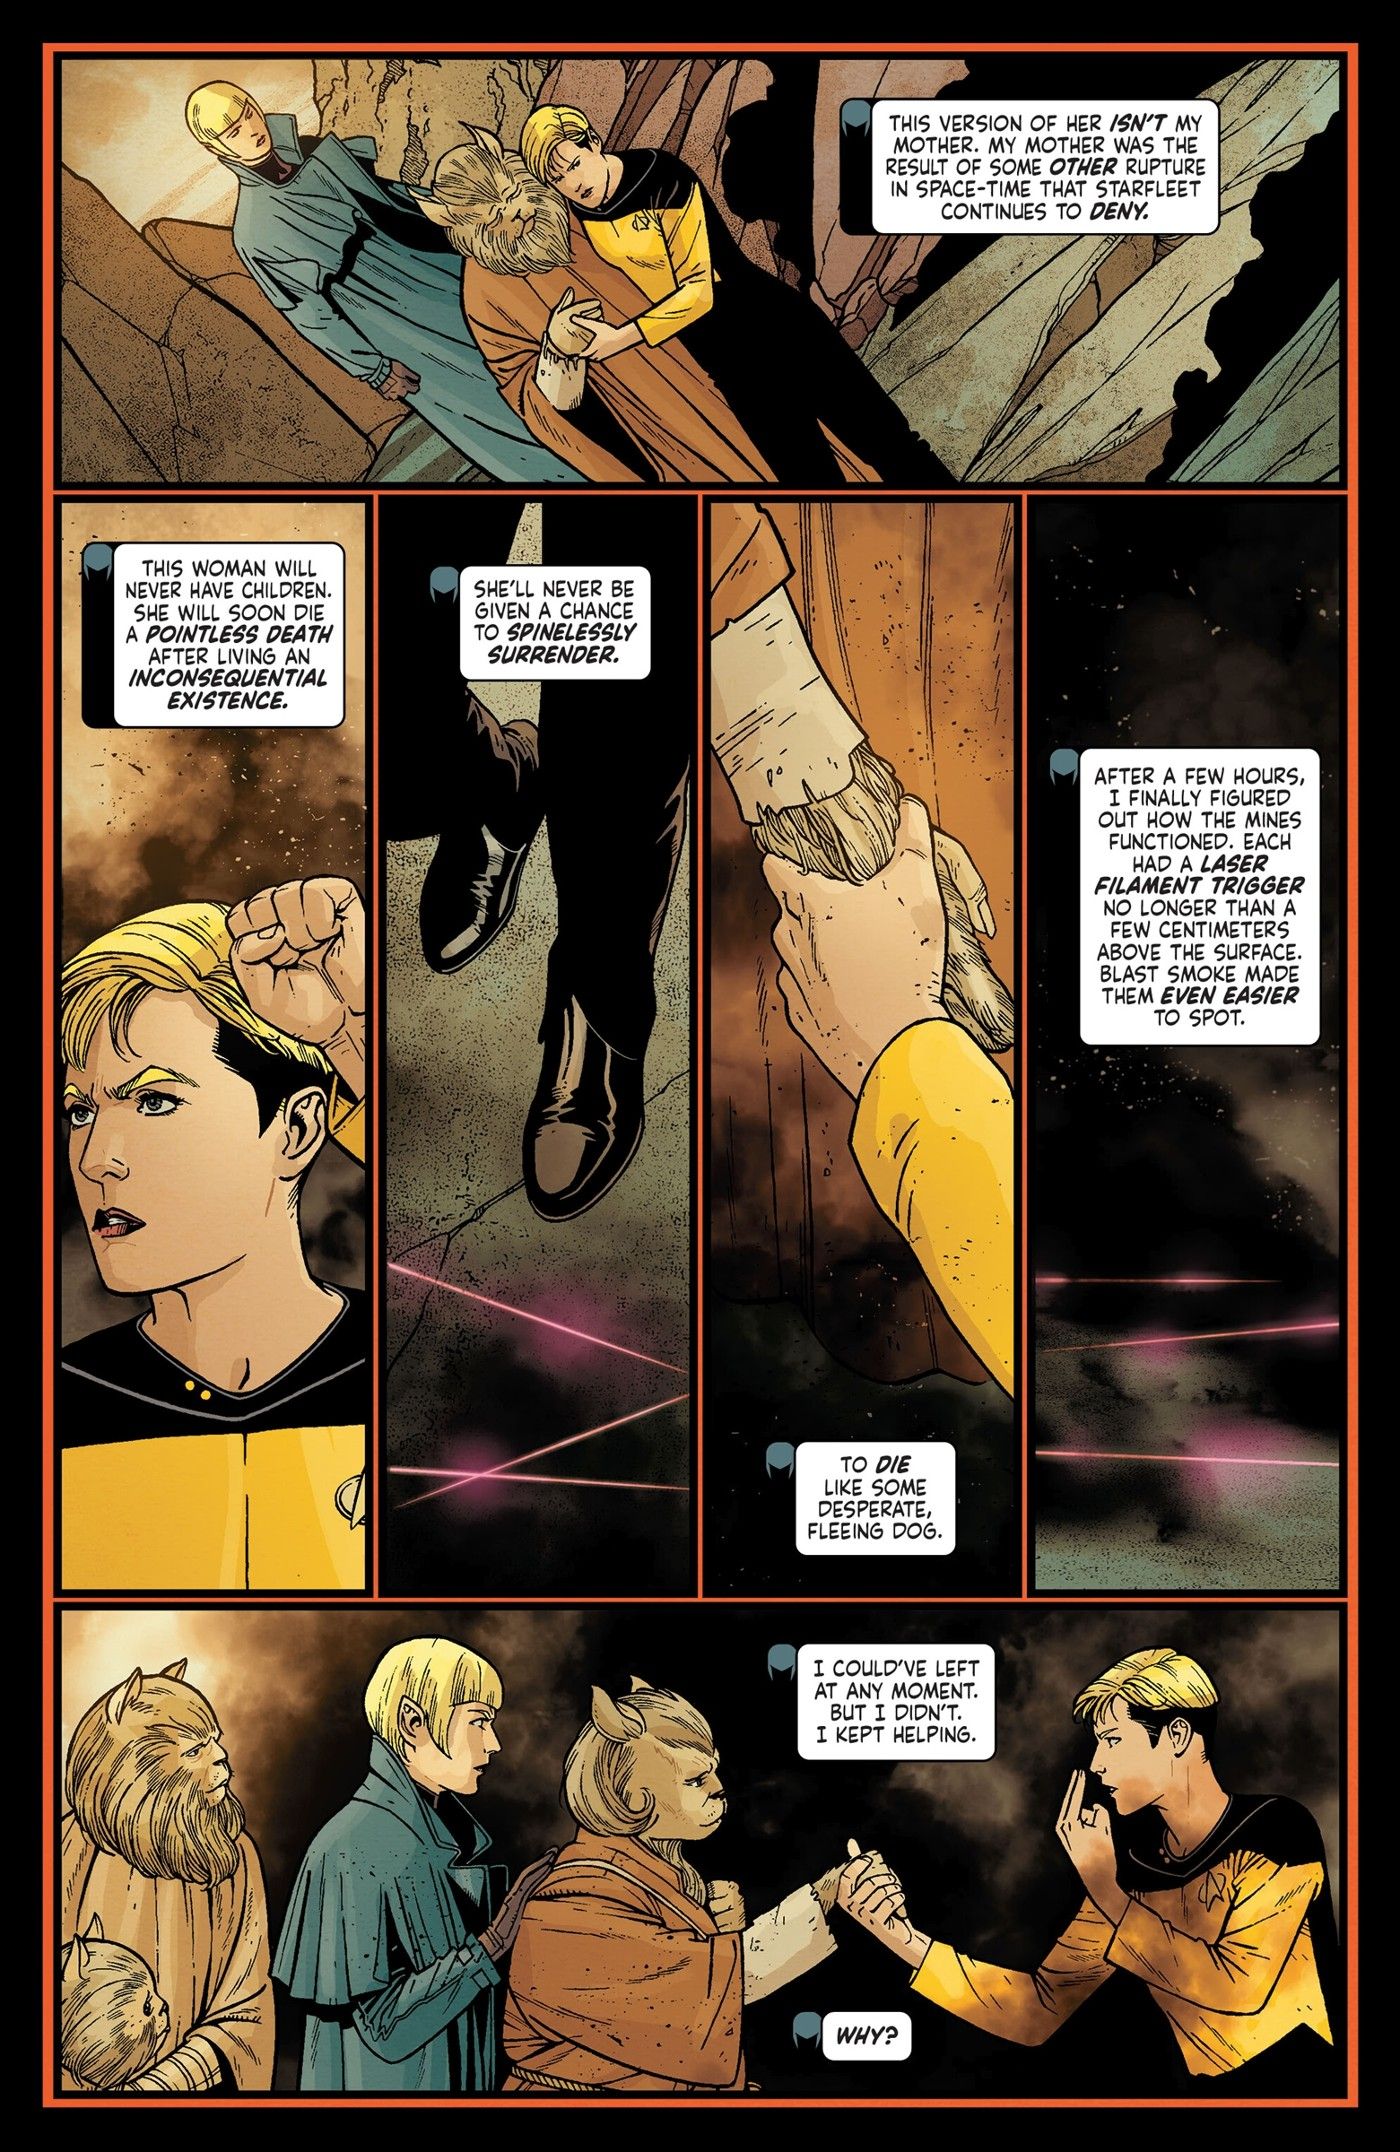 Six panels of Sela watching her mother Tasha Yar in action.